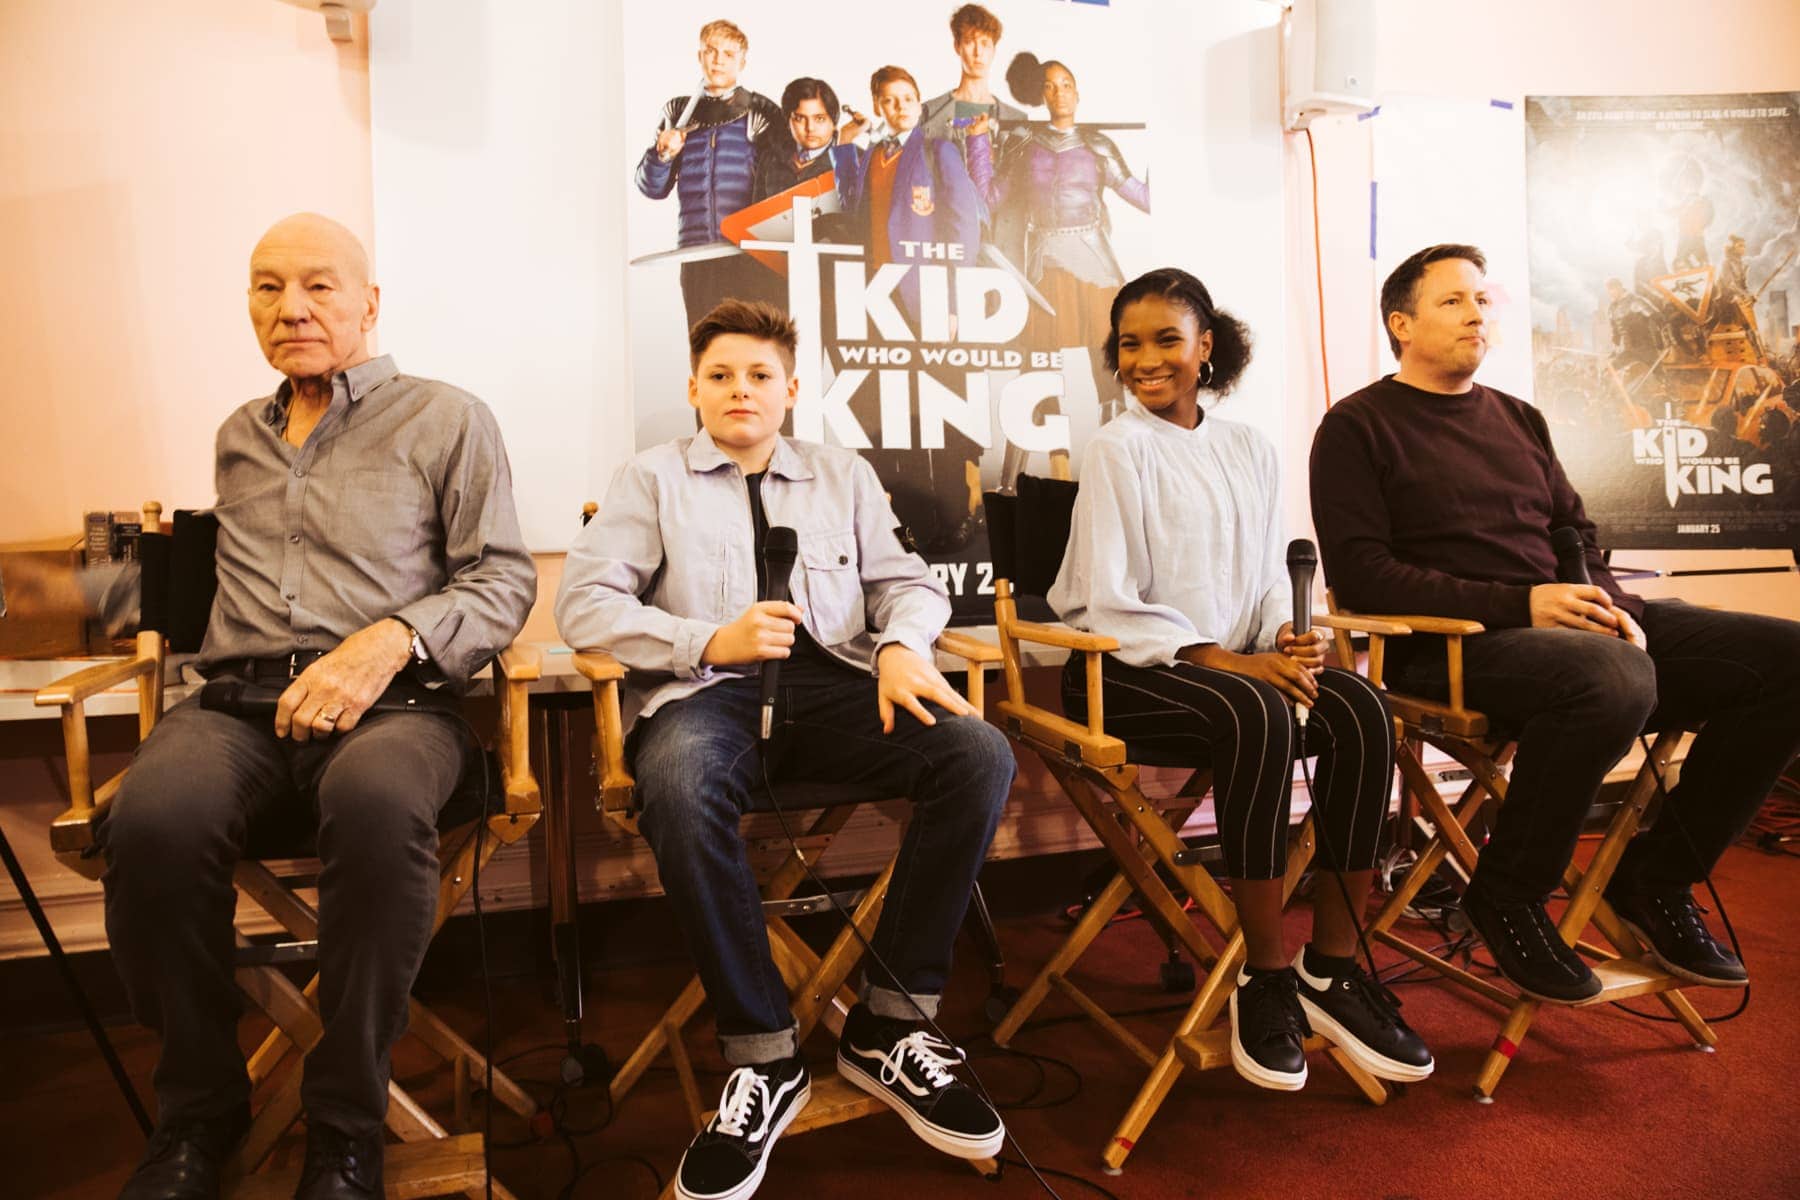 cast of the kid who would be king